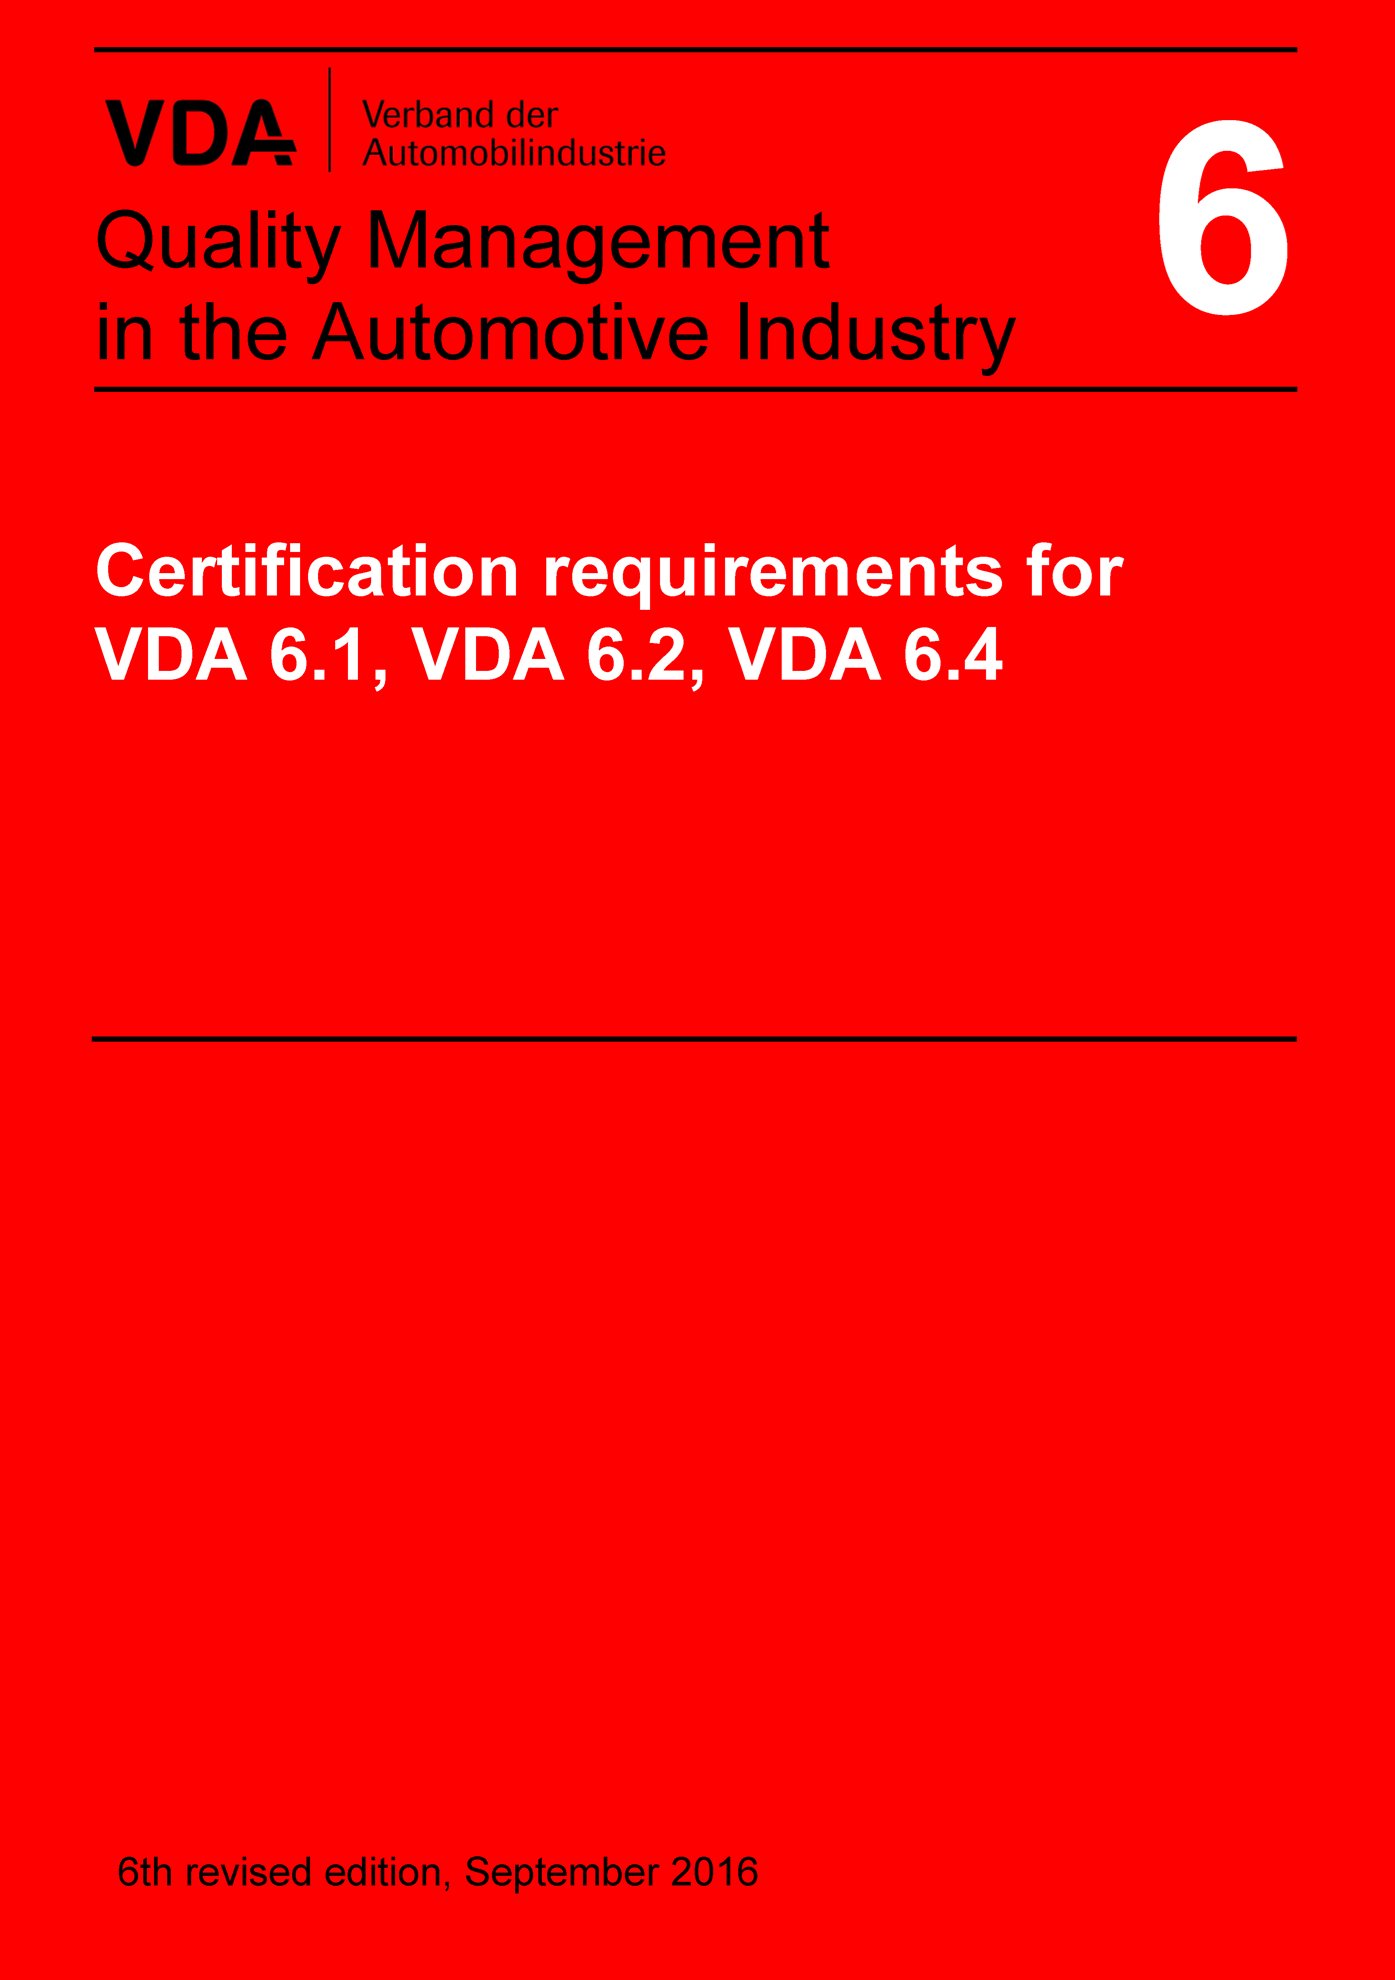 Publikation  VDA Volume 6 Certification Requirements for VDA 6.1, VDA 6.2 and VDA 6.4
 6th revised edition, September 2016
 (English edition published 2017/09) 1.9.2016 Ansicht